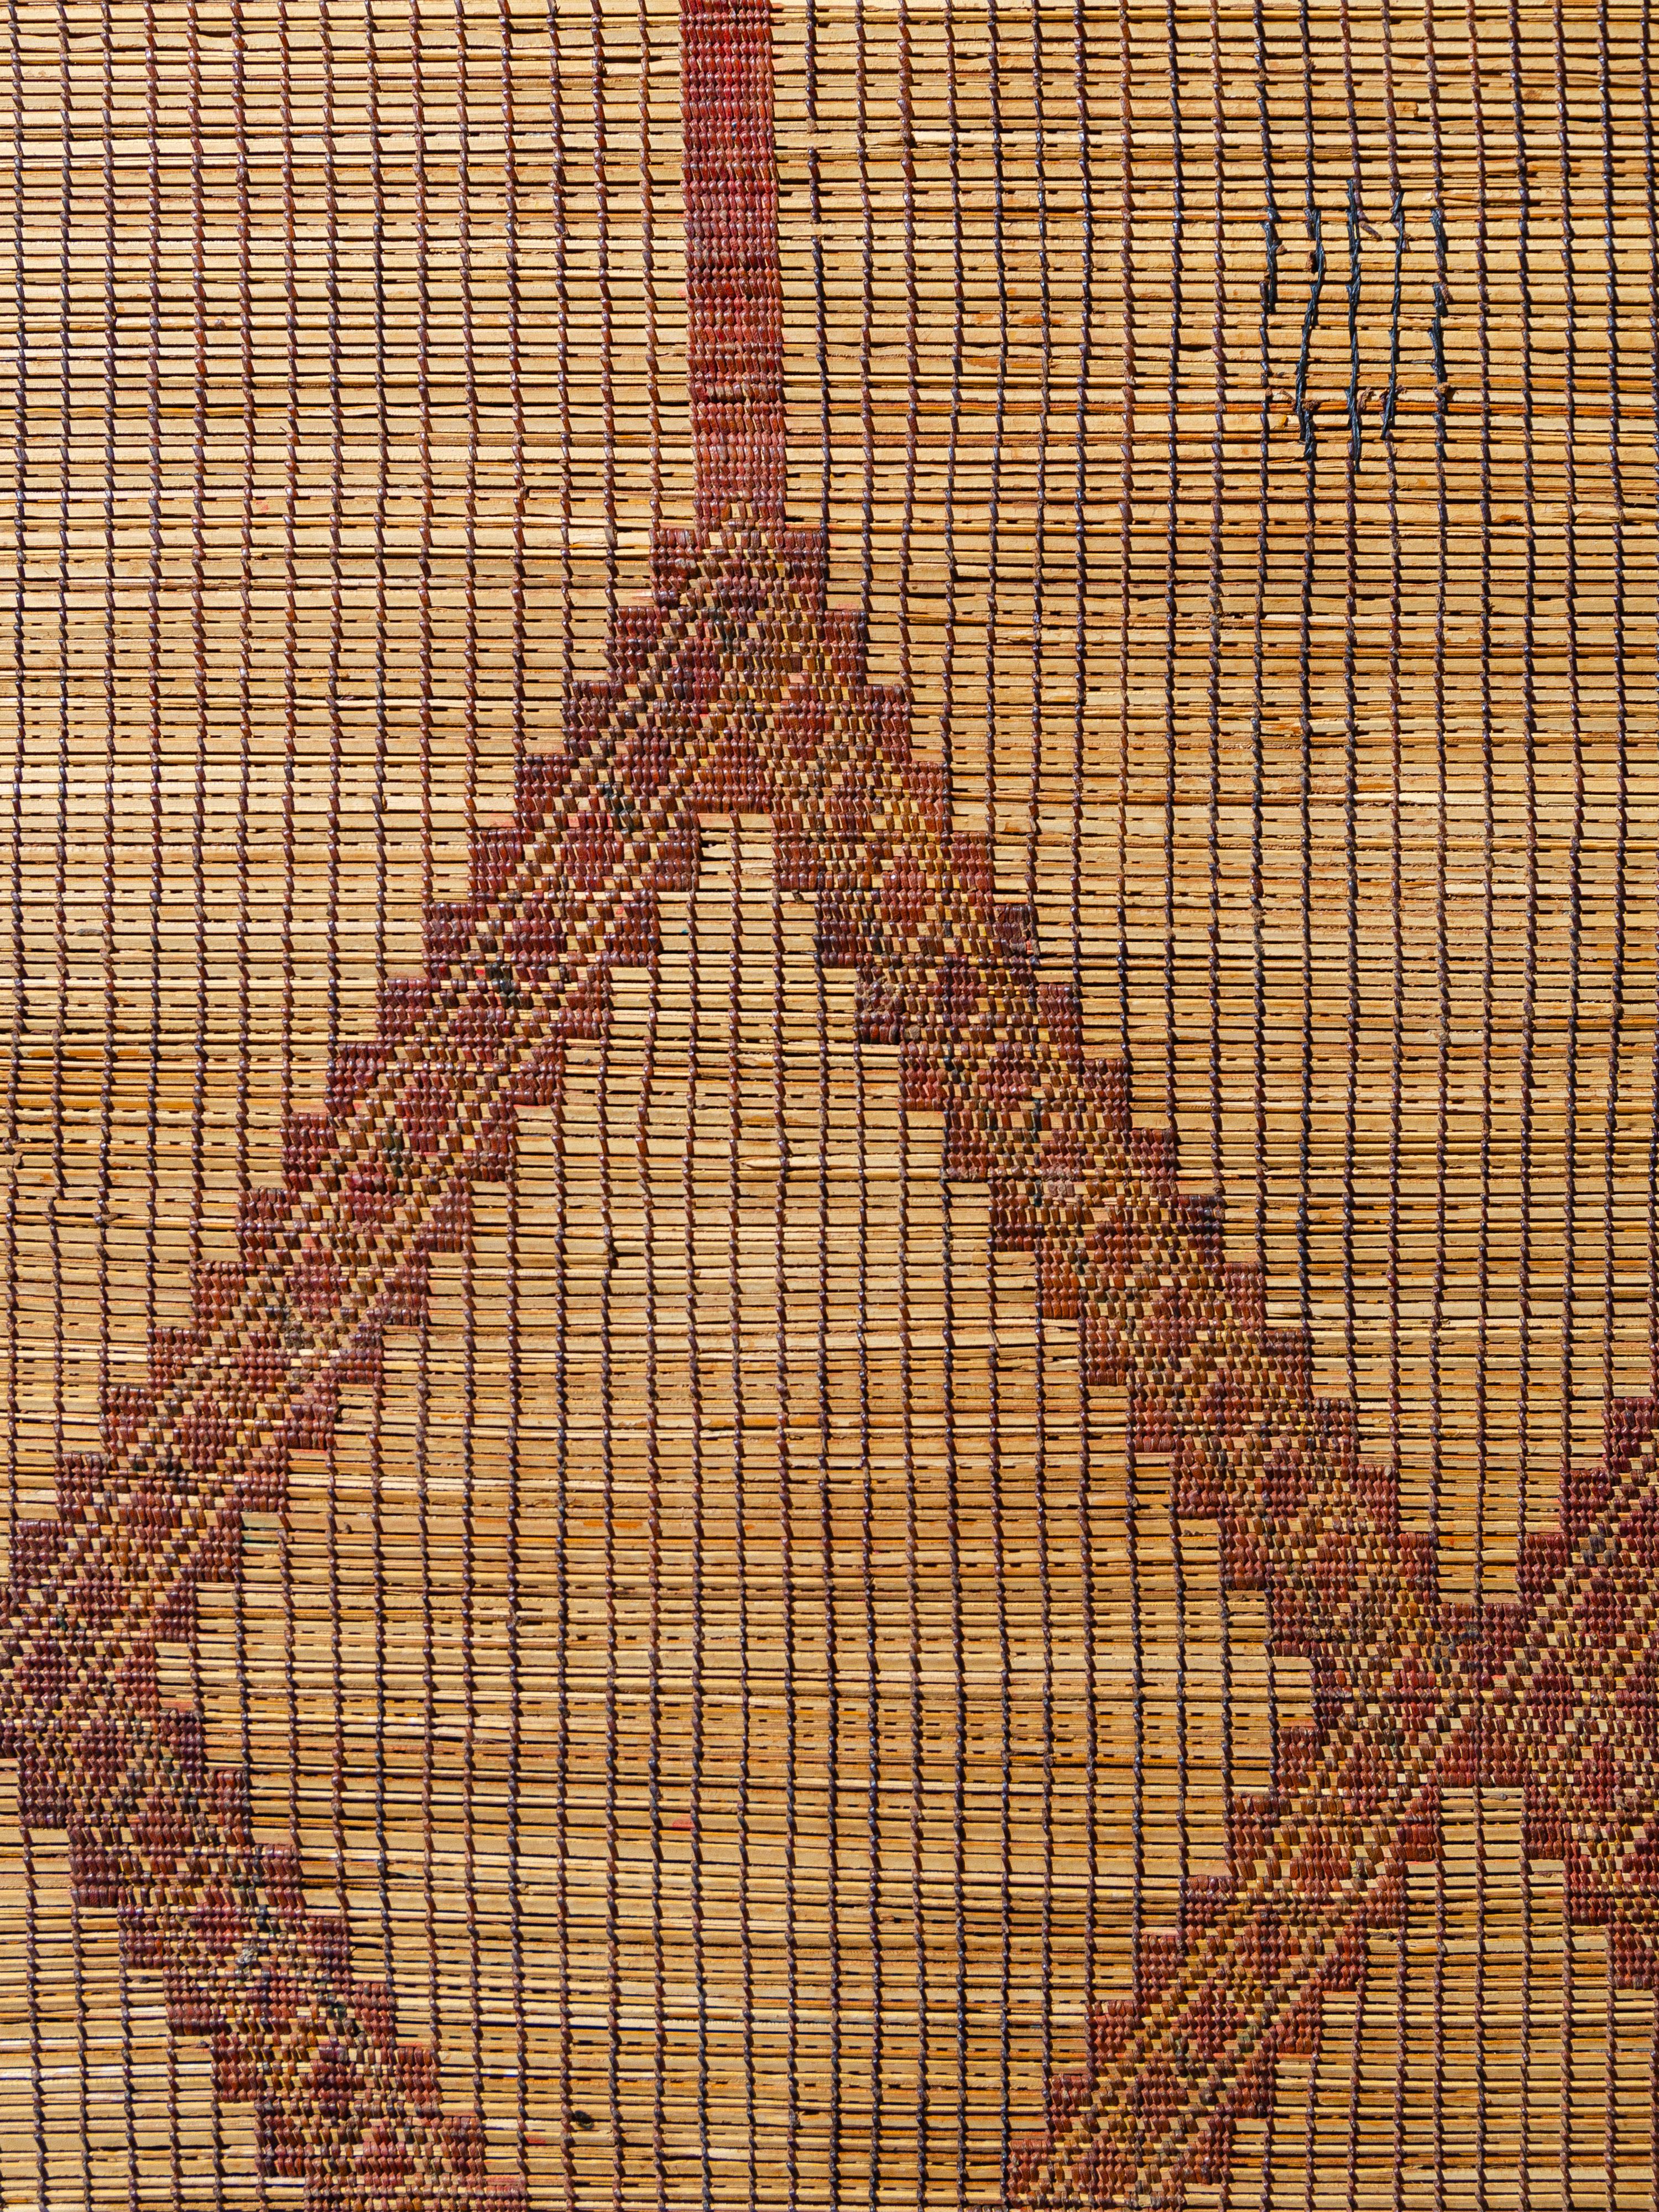 Woven by the nomadic Tuareg tribes of Mauritania with palm reed and leather, these mats offer a textural alternative to traditional woven textile floor coverings. This piece exhibits a rather symmetrical prominent lozenge pattern small diversions